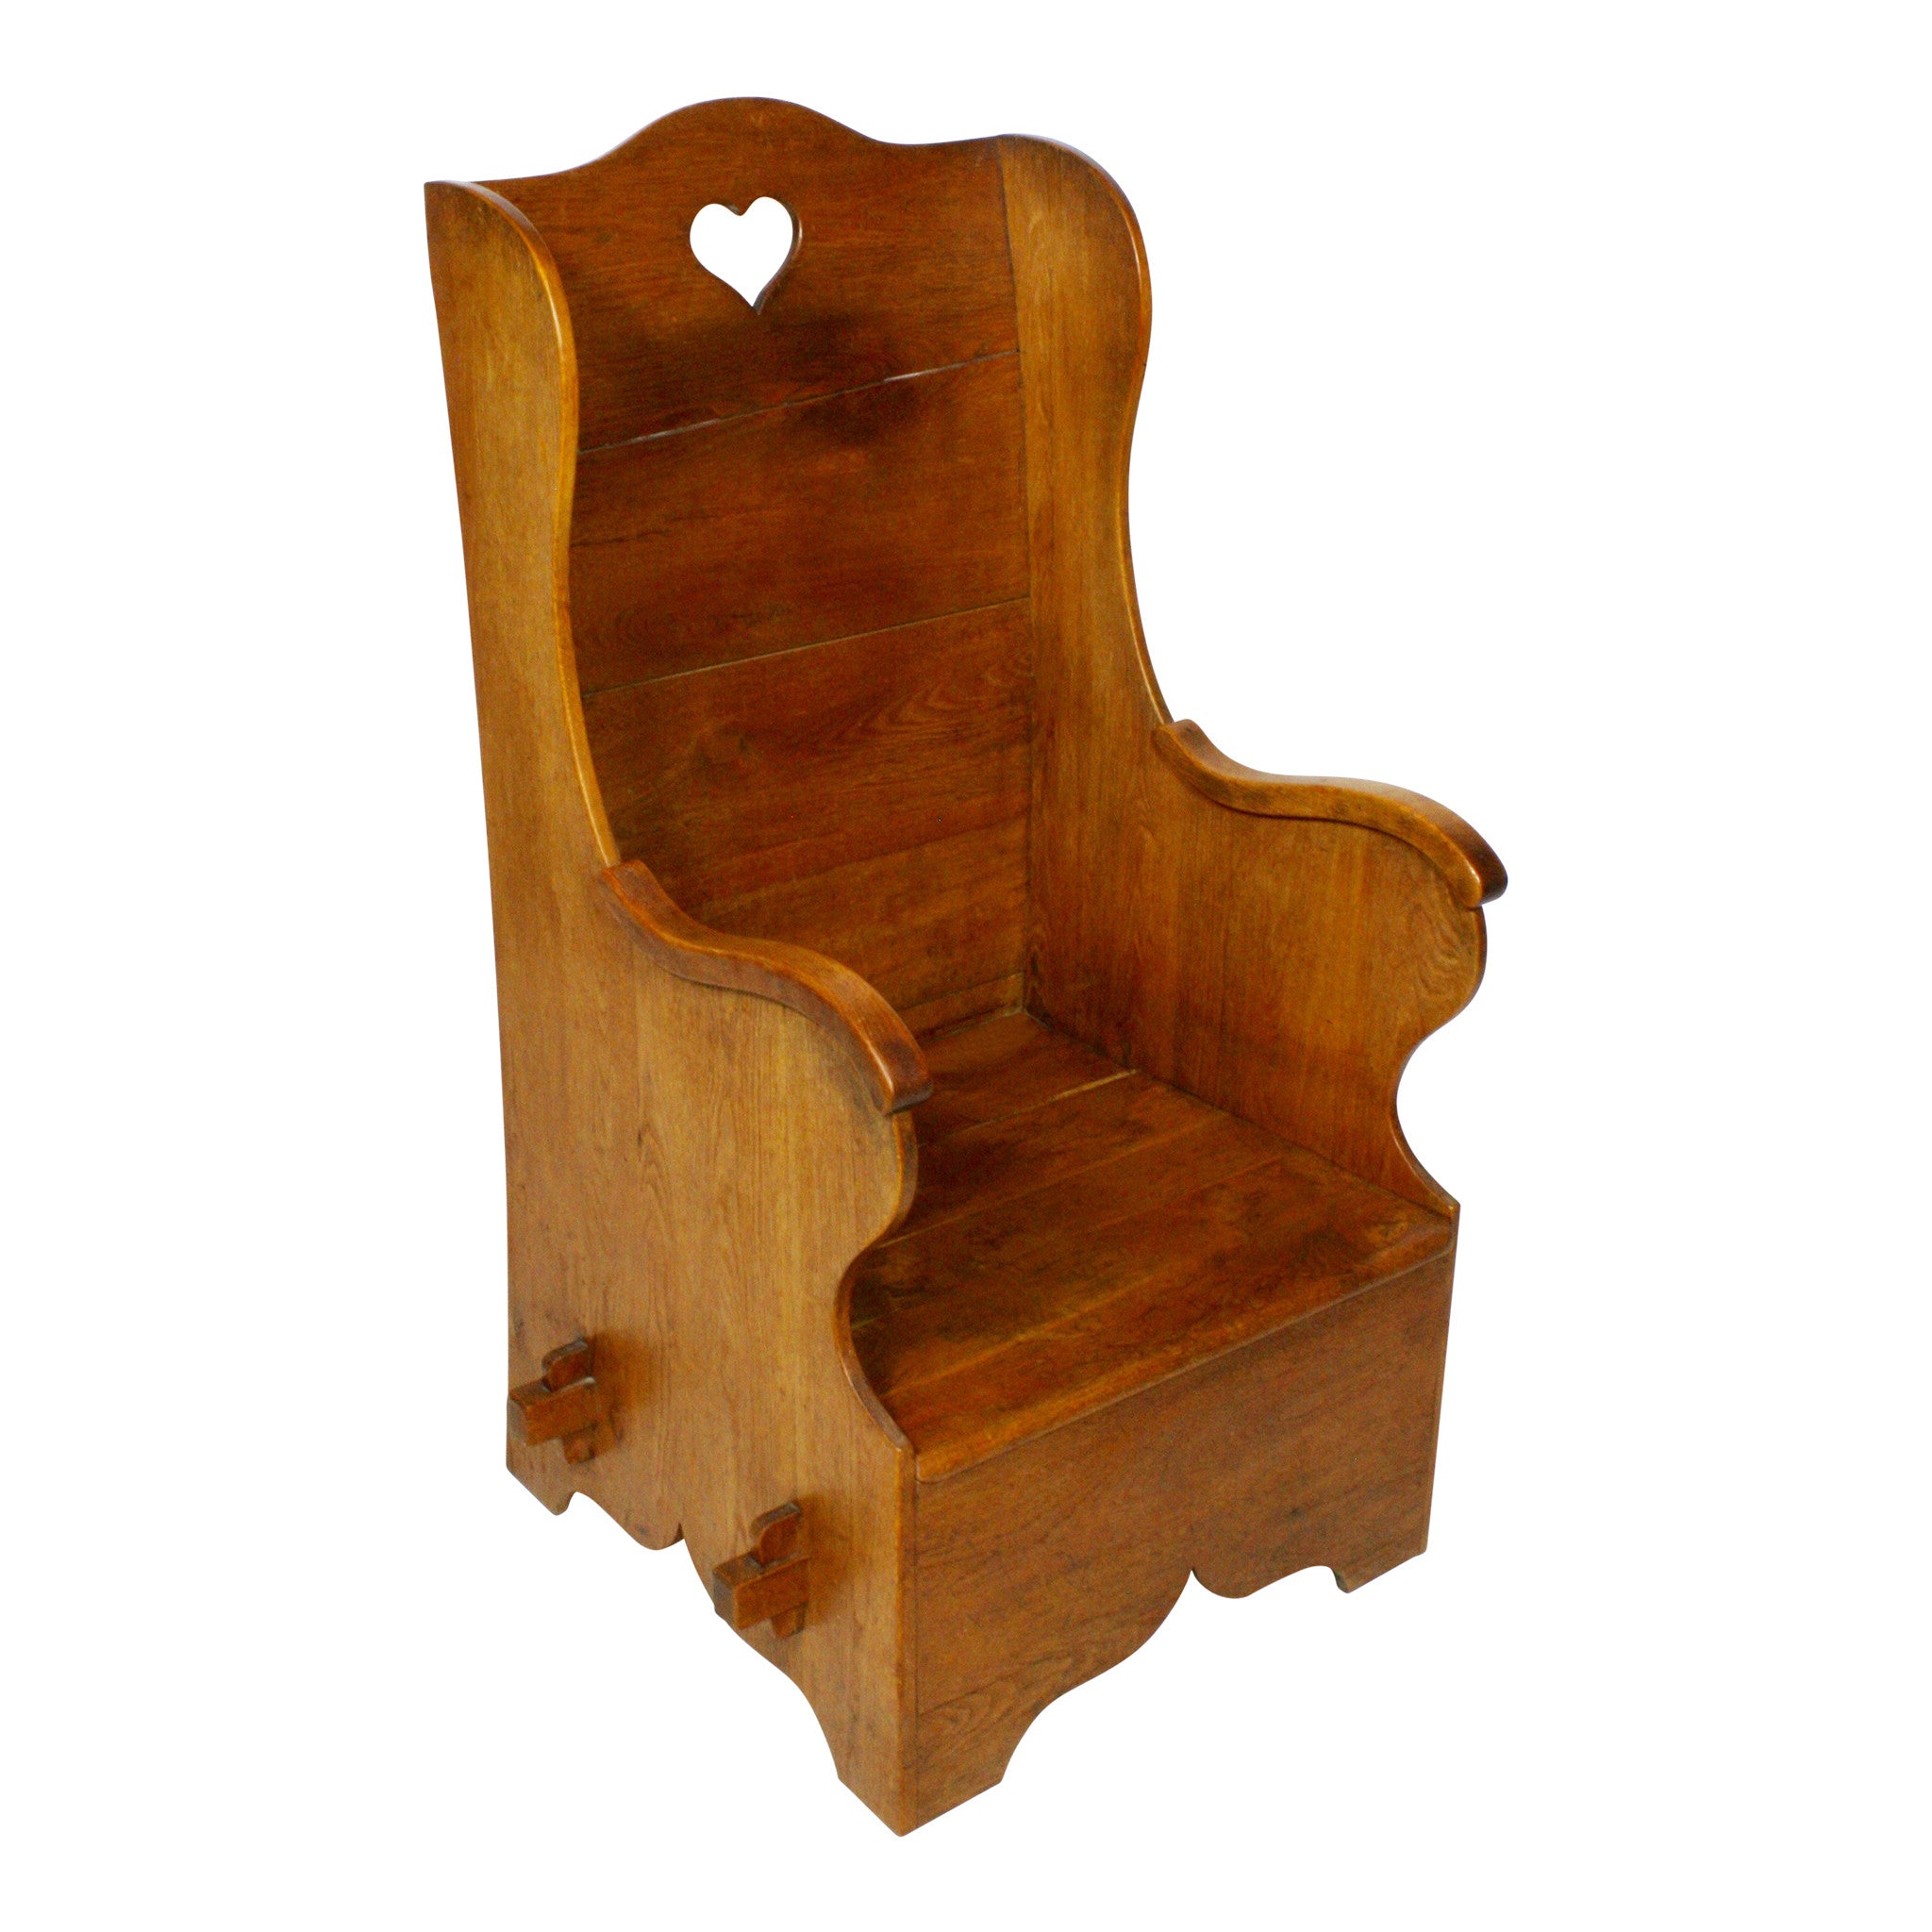 ski-country-antiques - English Oak Highback Chair with Heart